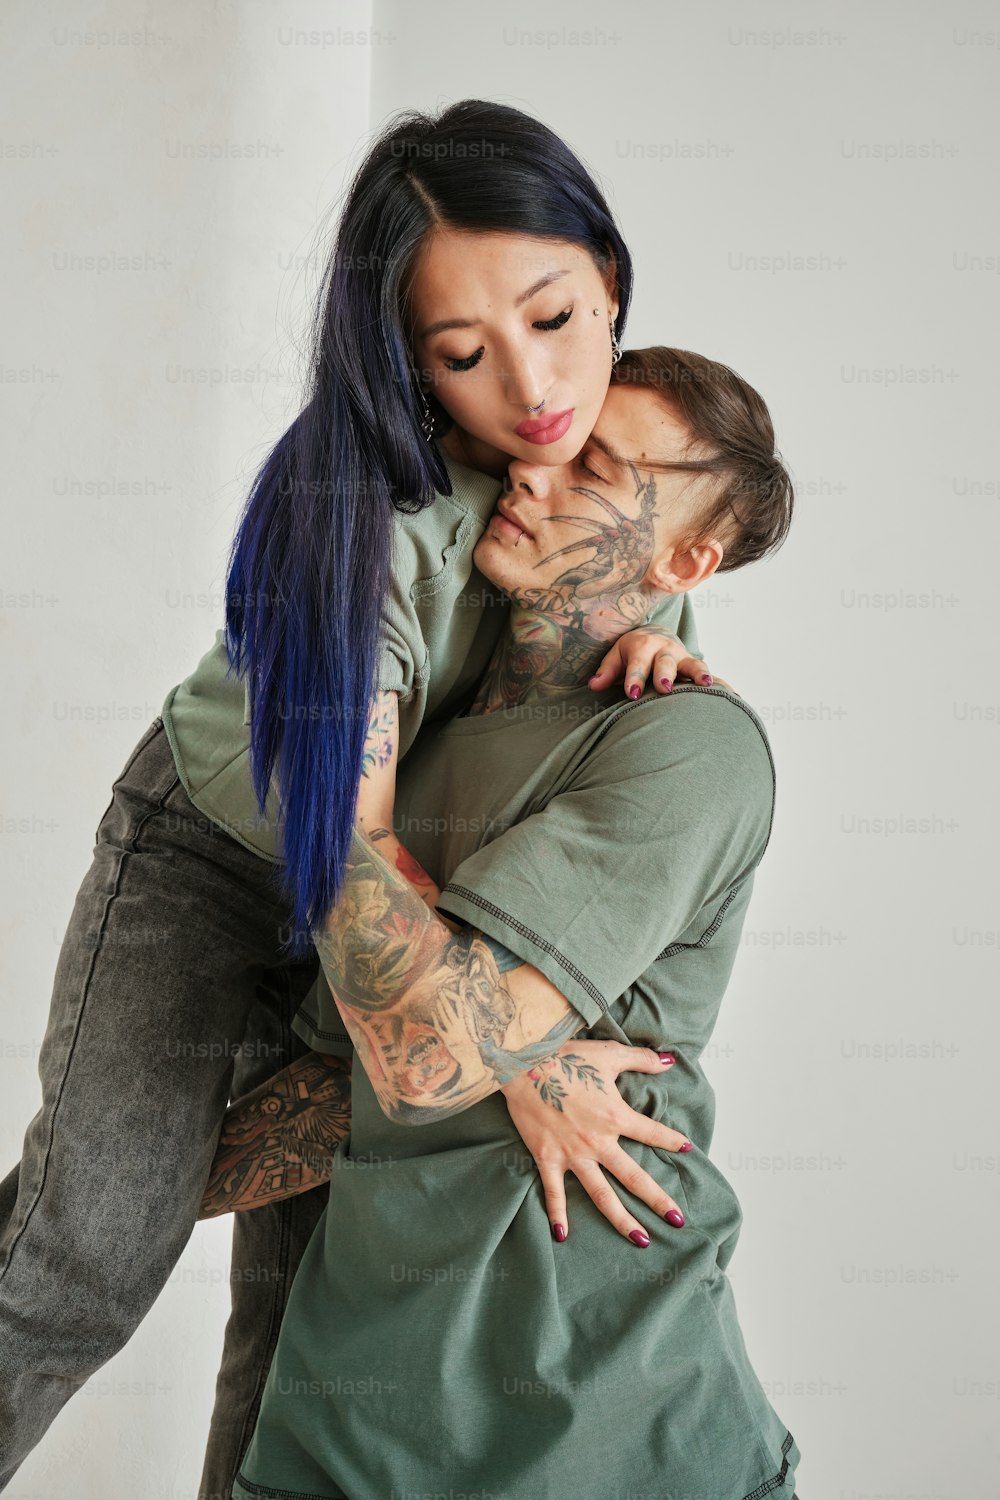 a woman is hugging a man with tattoos on his arms